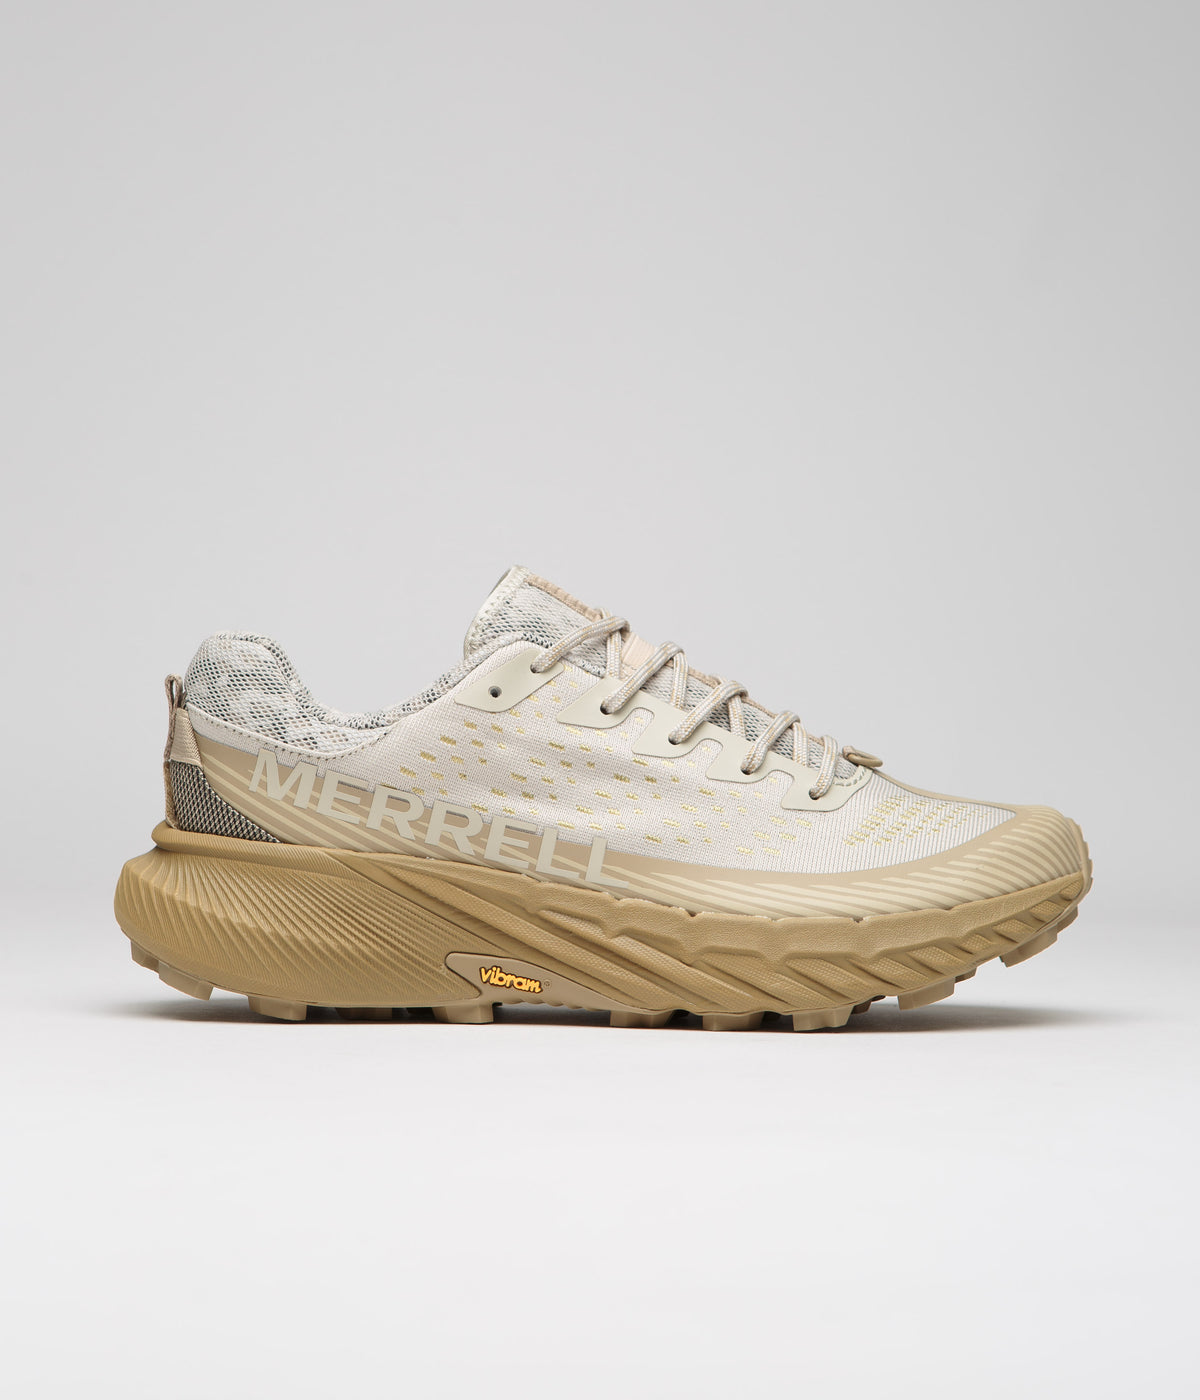 Merrell Agility Peak 5 Shoes - Oyster / Coyote | Always in Colour